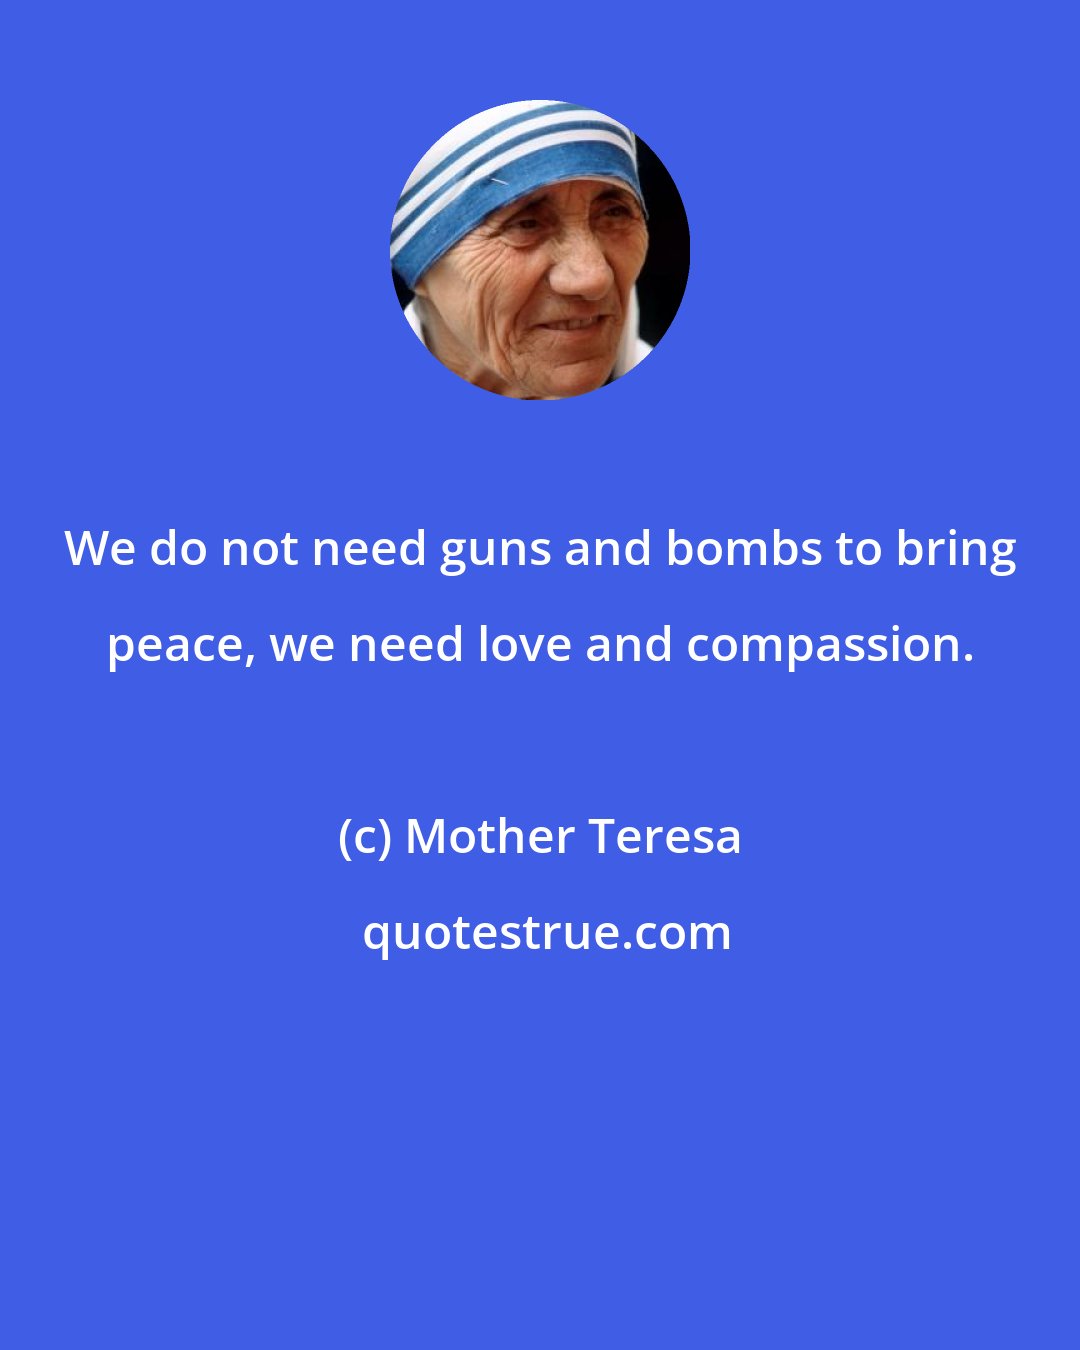 Mother Teresa: We do not need guns and bombs to bring peace, we need love and compassion.